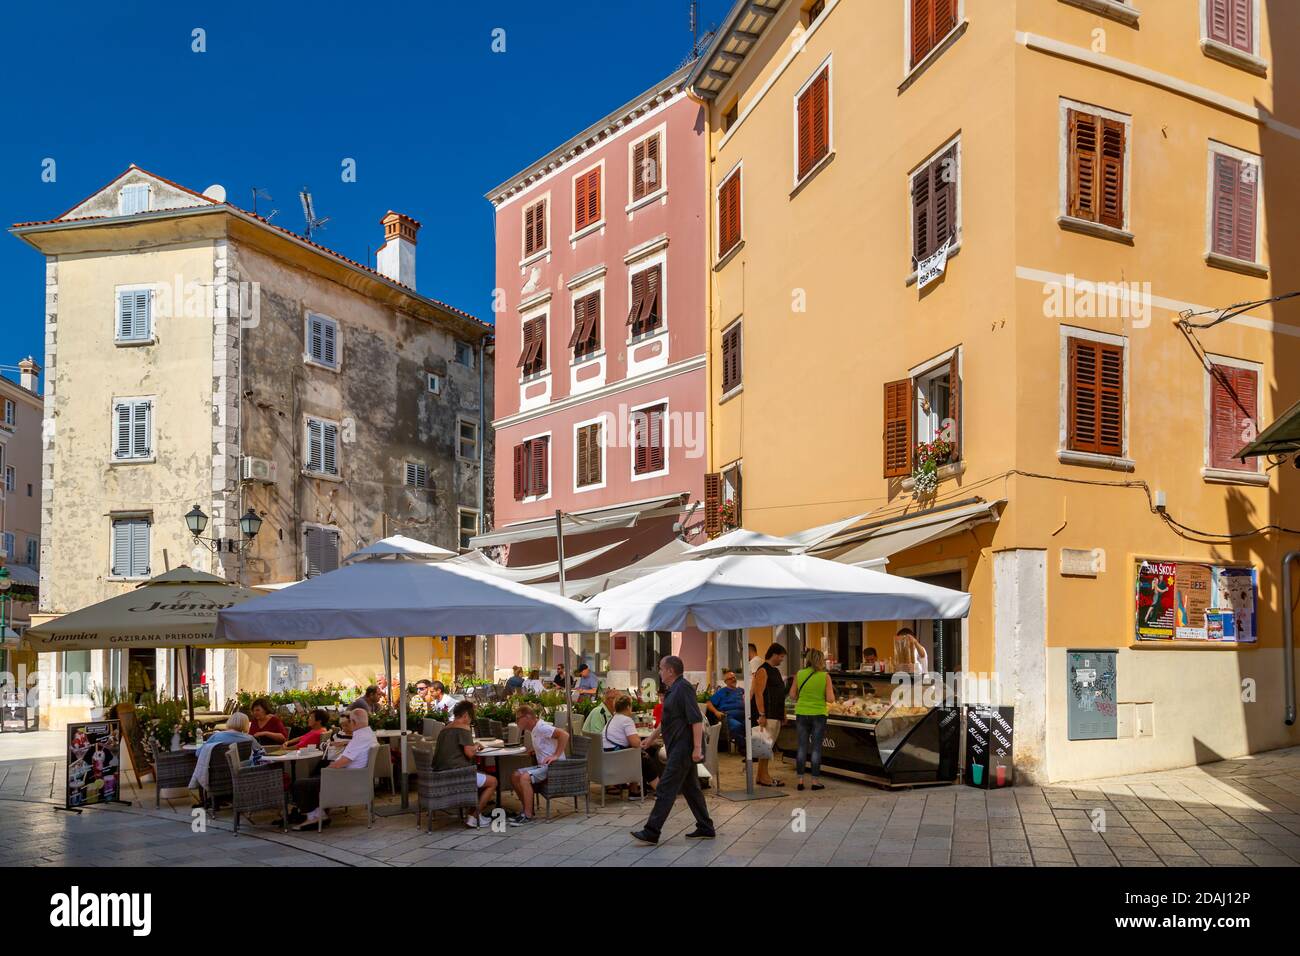 View of cafe and people in colourful old town, Rovinj, Istria, Croatia, Adriatic, Europe Stock Photo